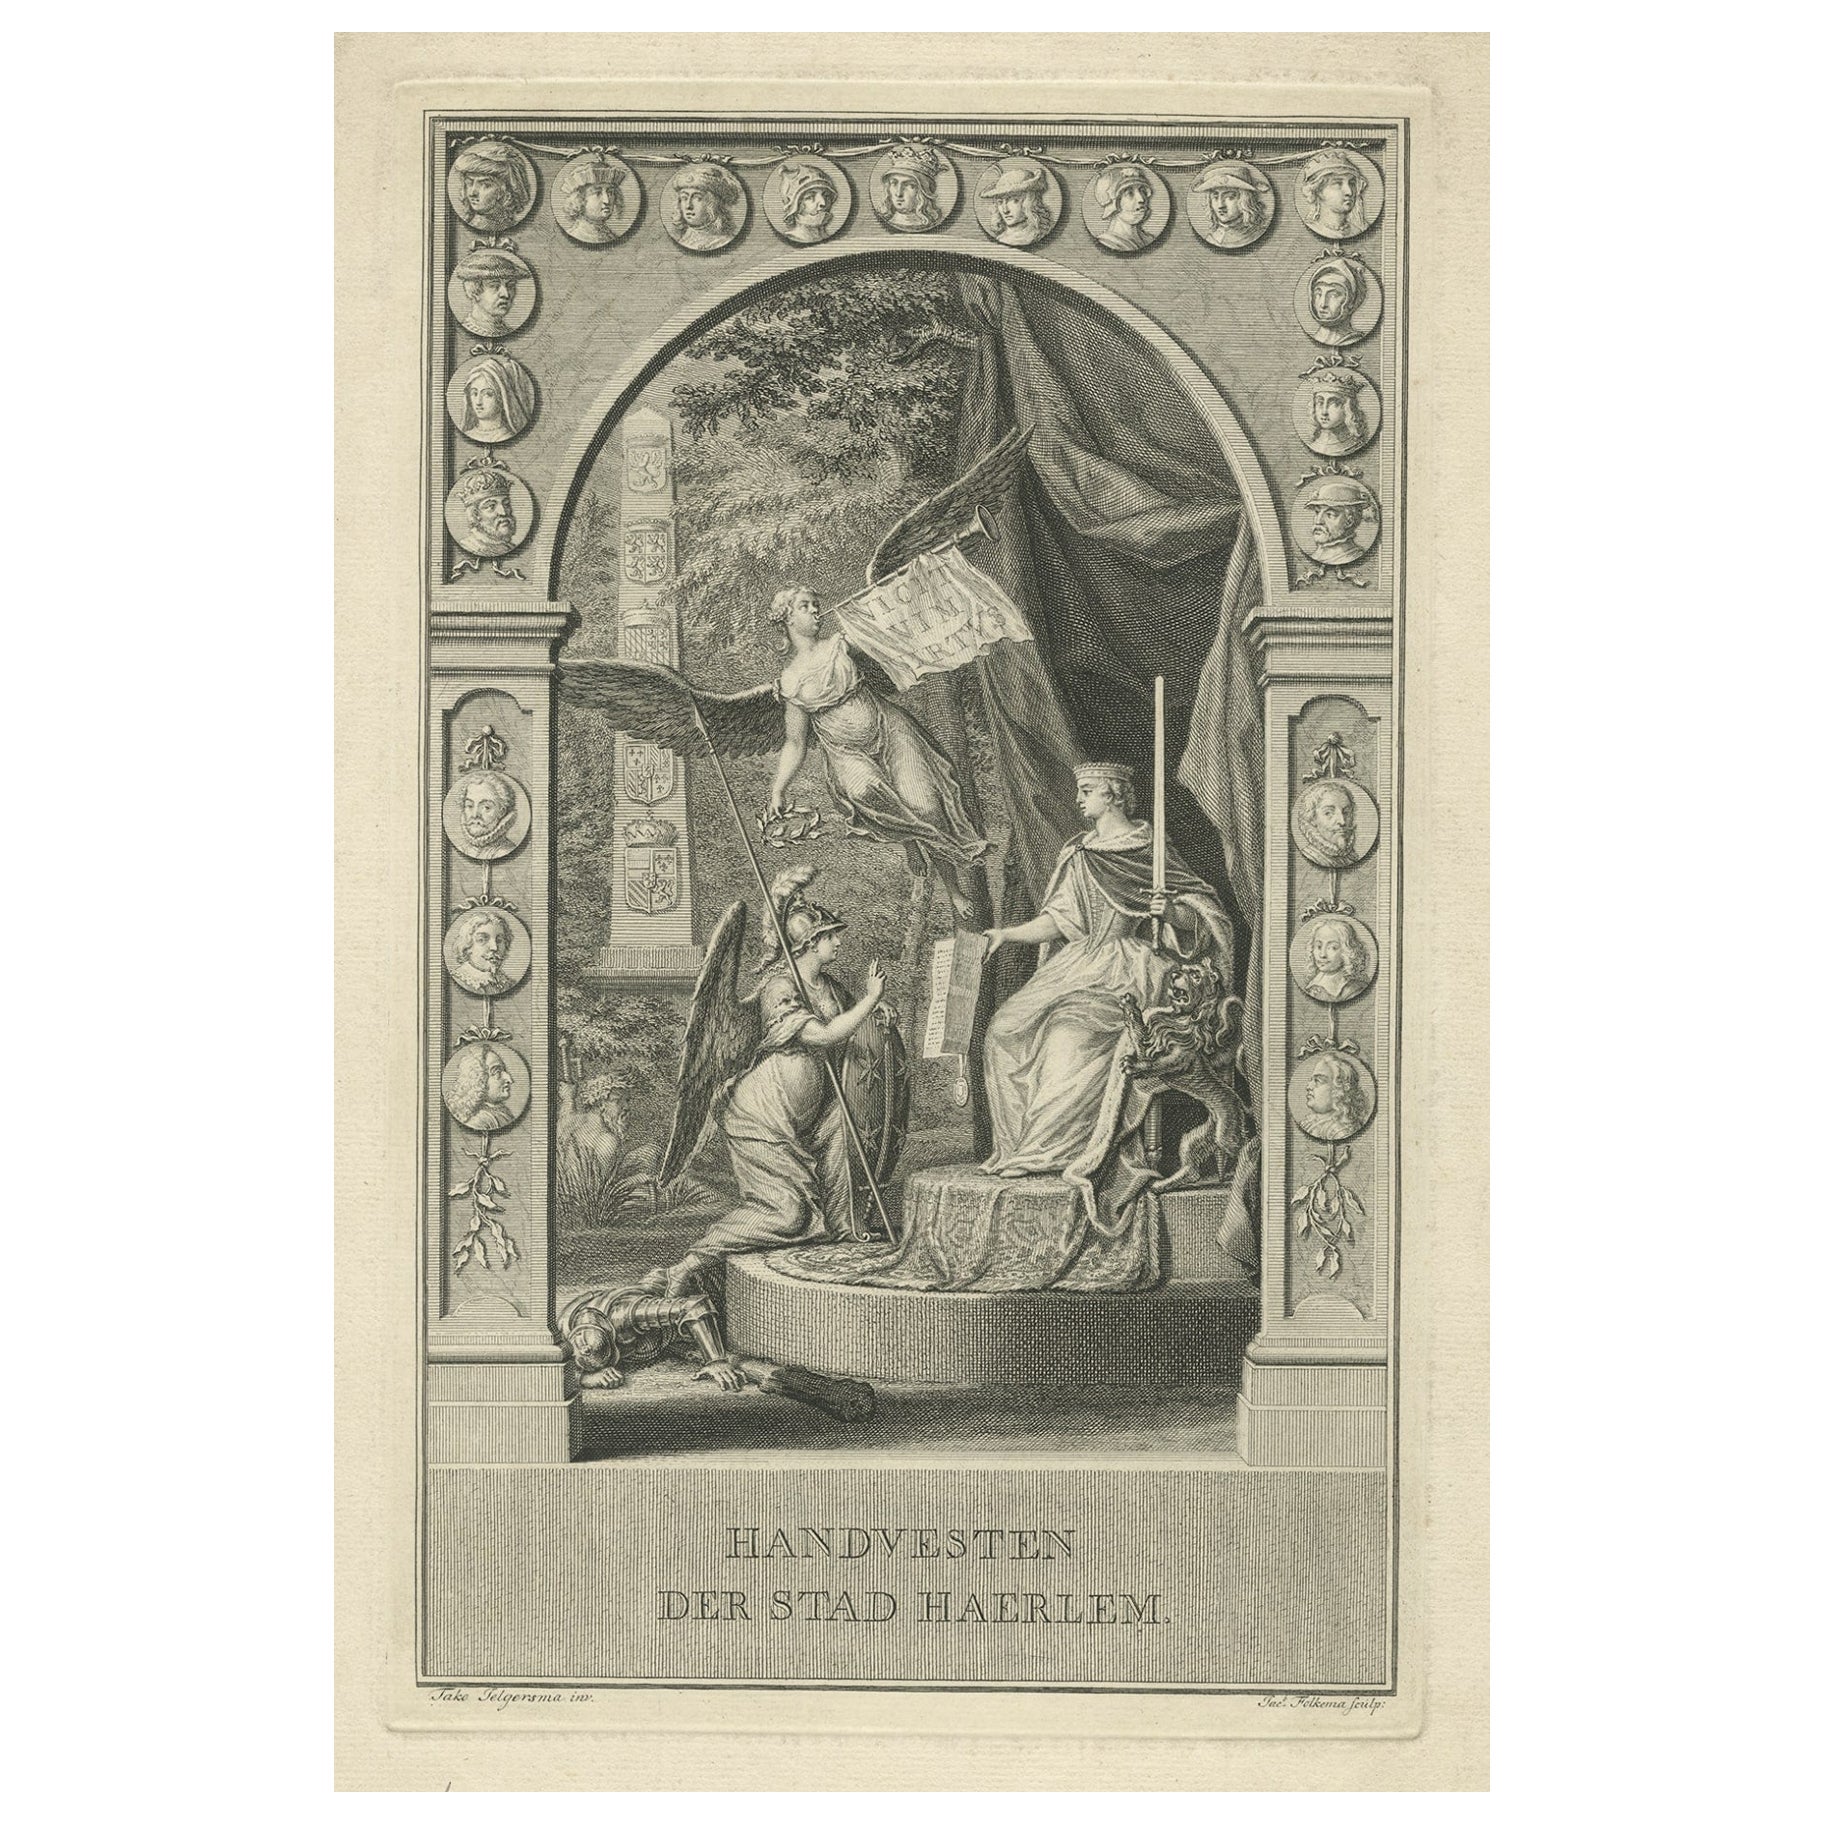 Allegorical Frontispiece of Freedom and Rights of Haarlem, The Netherlands, 1751